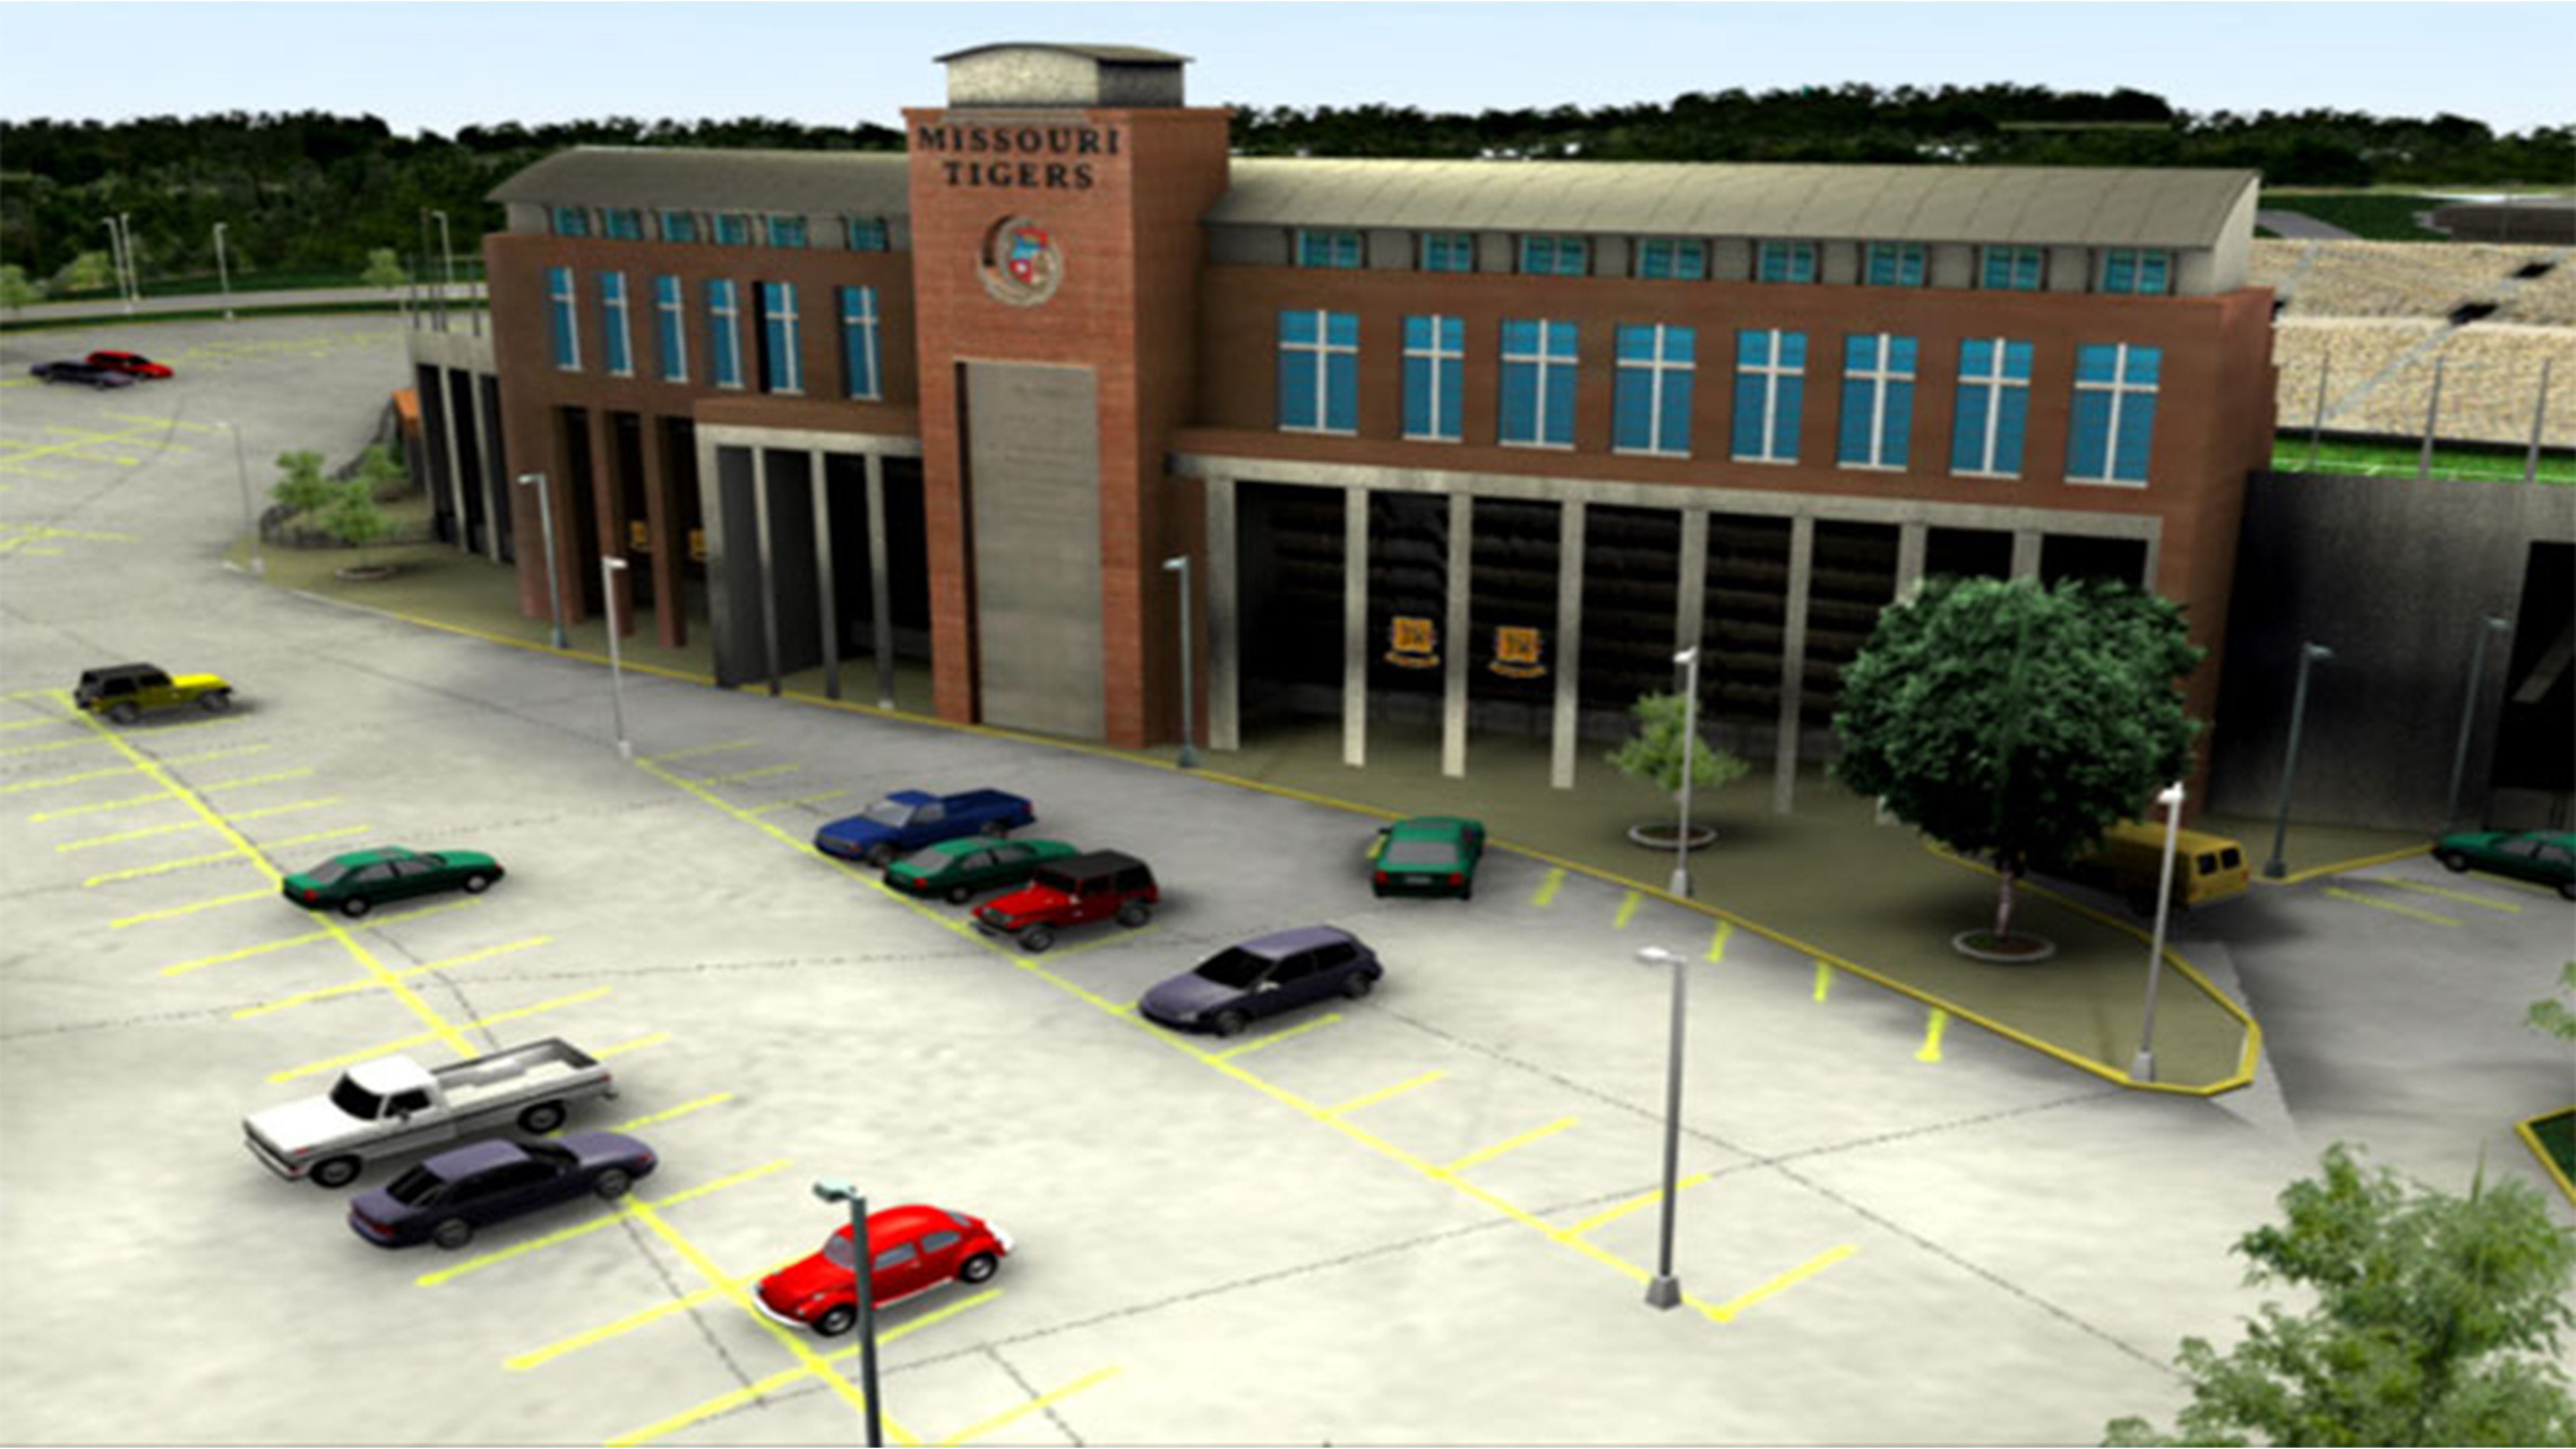 Missouri Tigers College campus project. Created in 2002